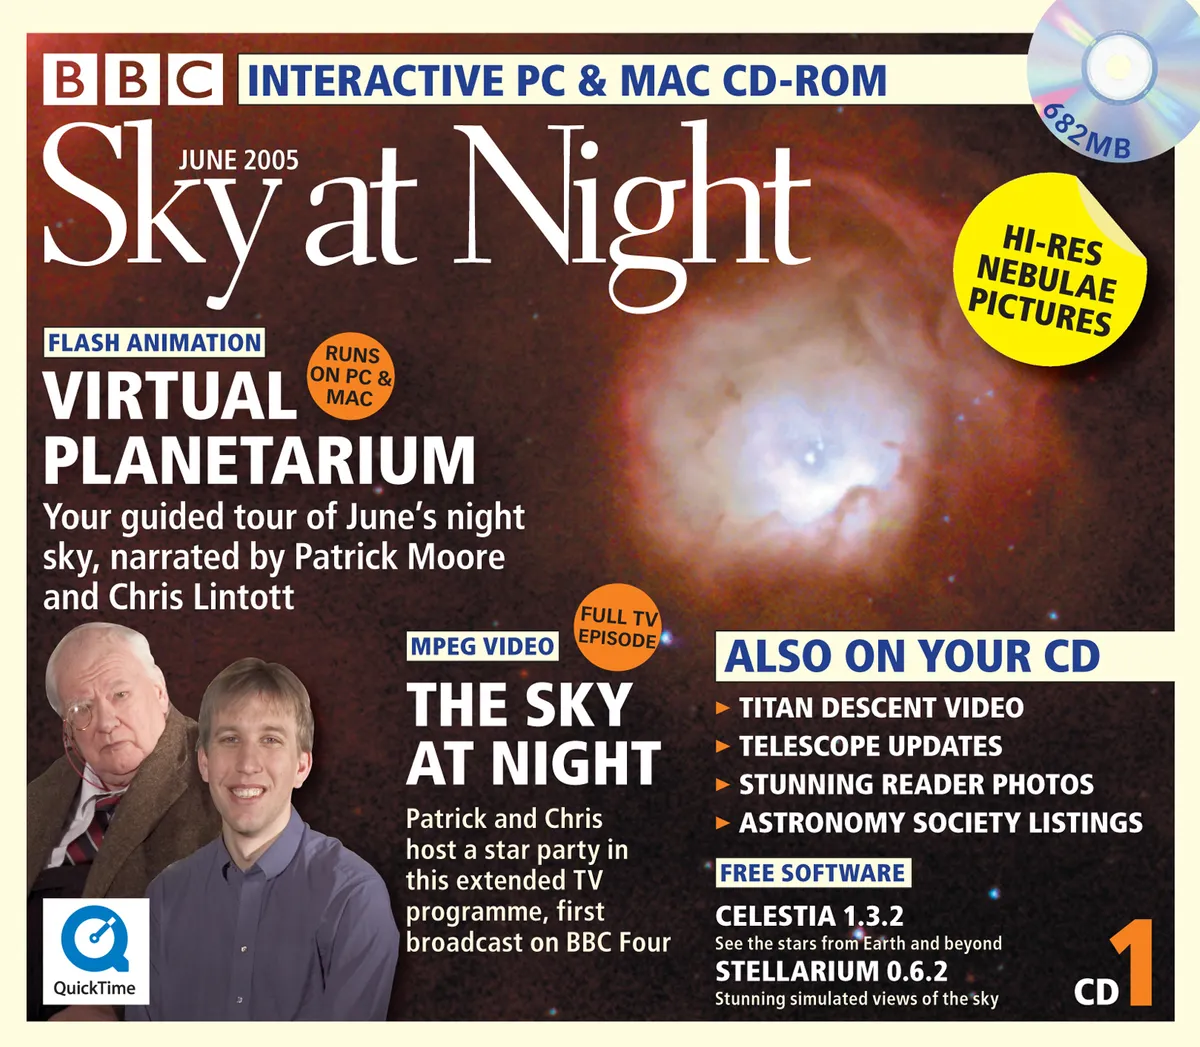 BBC Sky at Night Magazine's Virtual Planetarium appeared in the very first issue via CD ROM, June 2005.